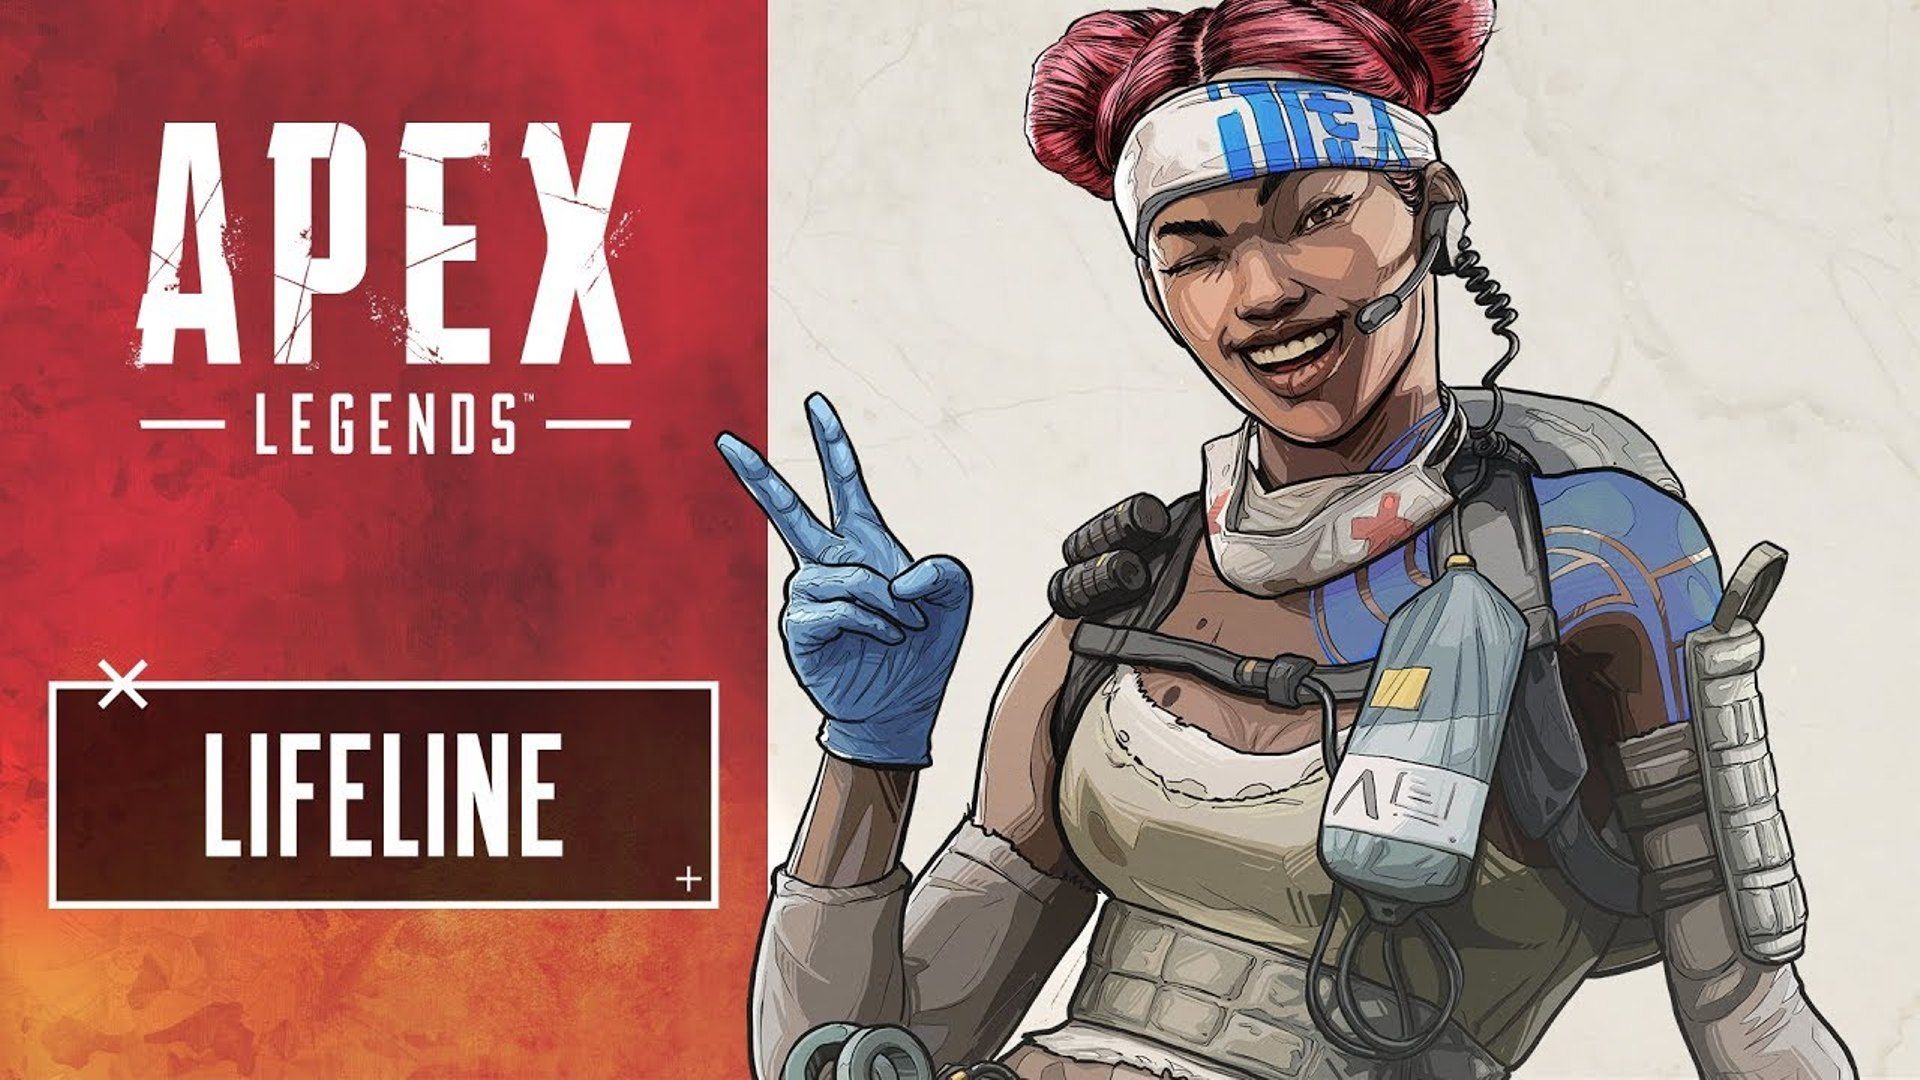 Apex Legends Lifeline Wallpapers posted by Ethan Cunningham.